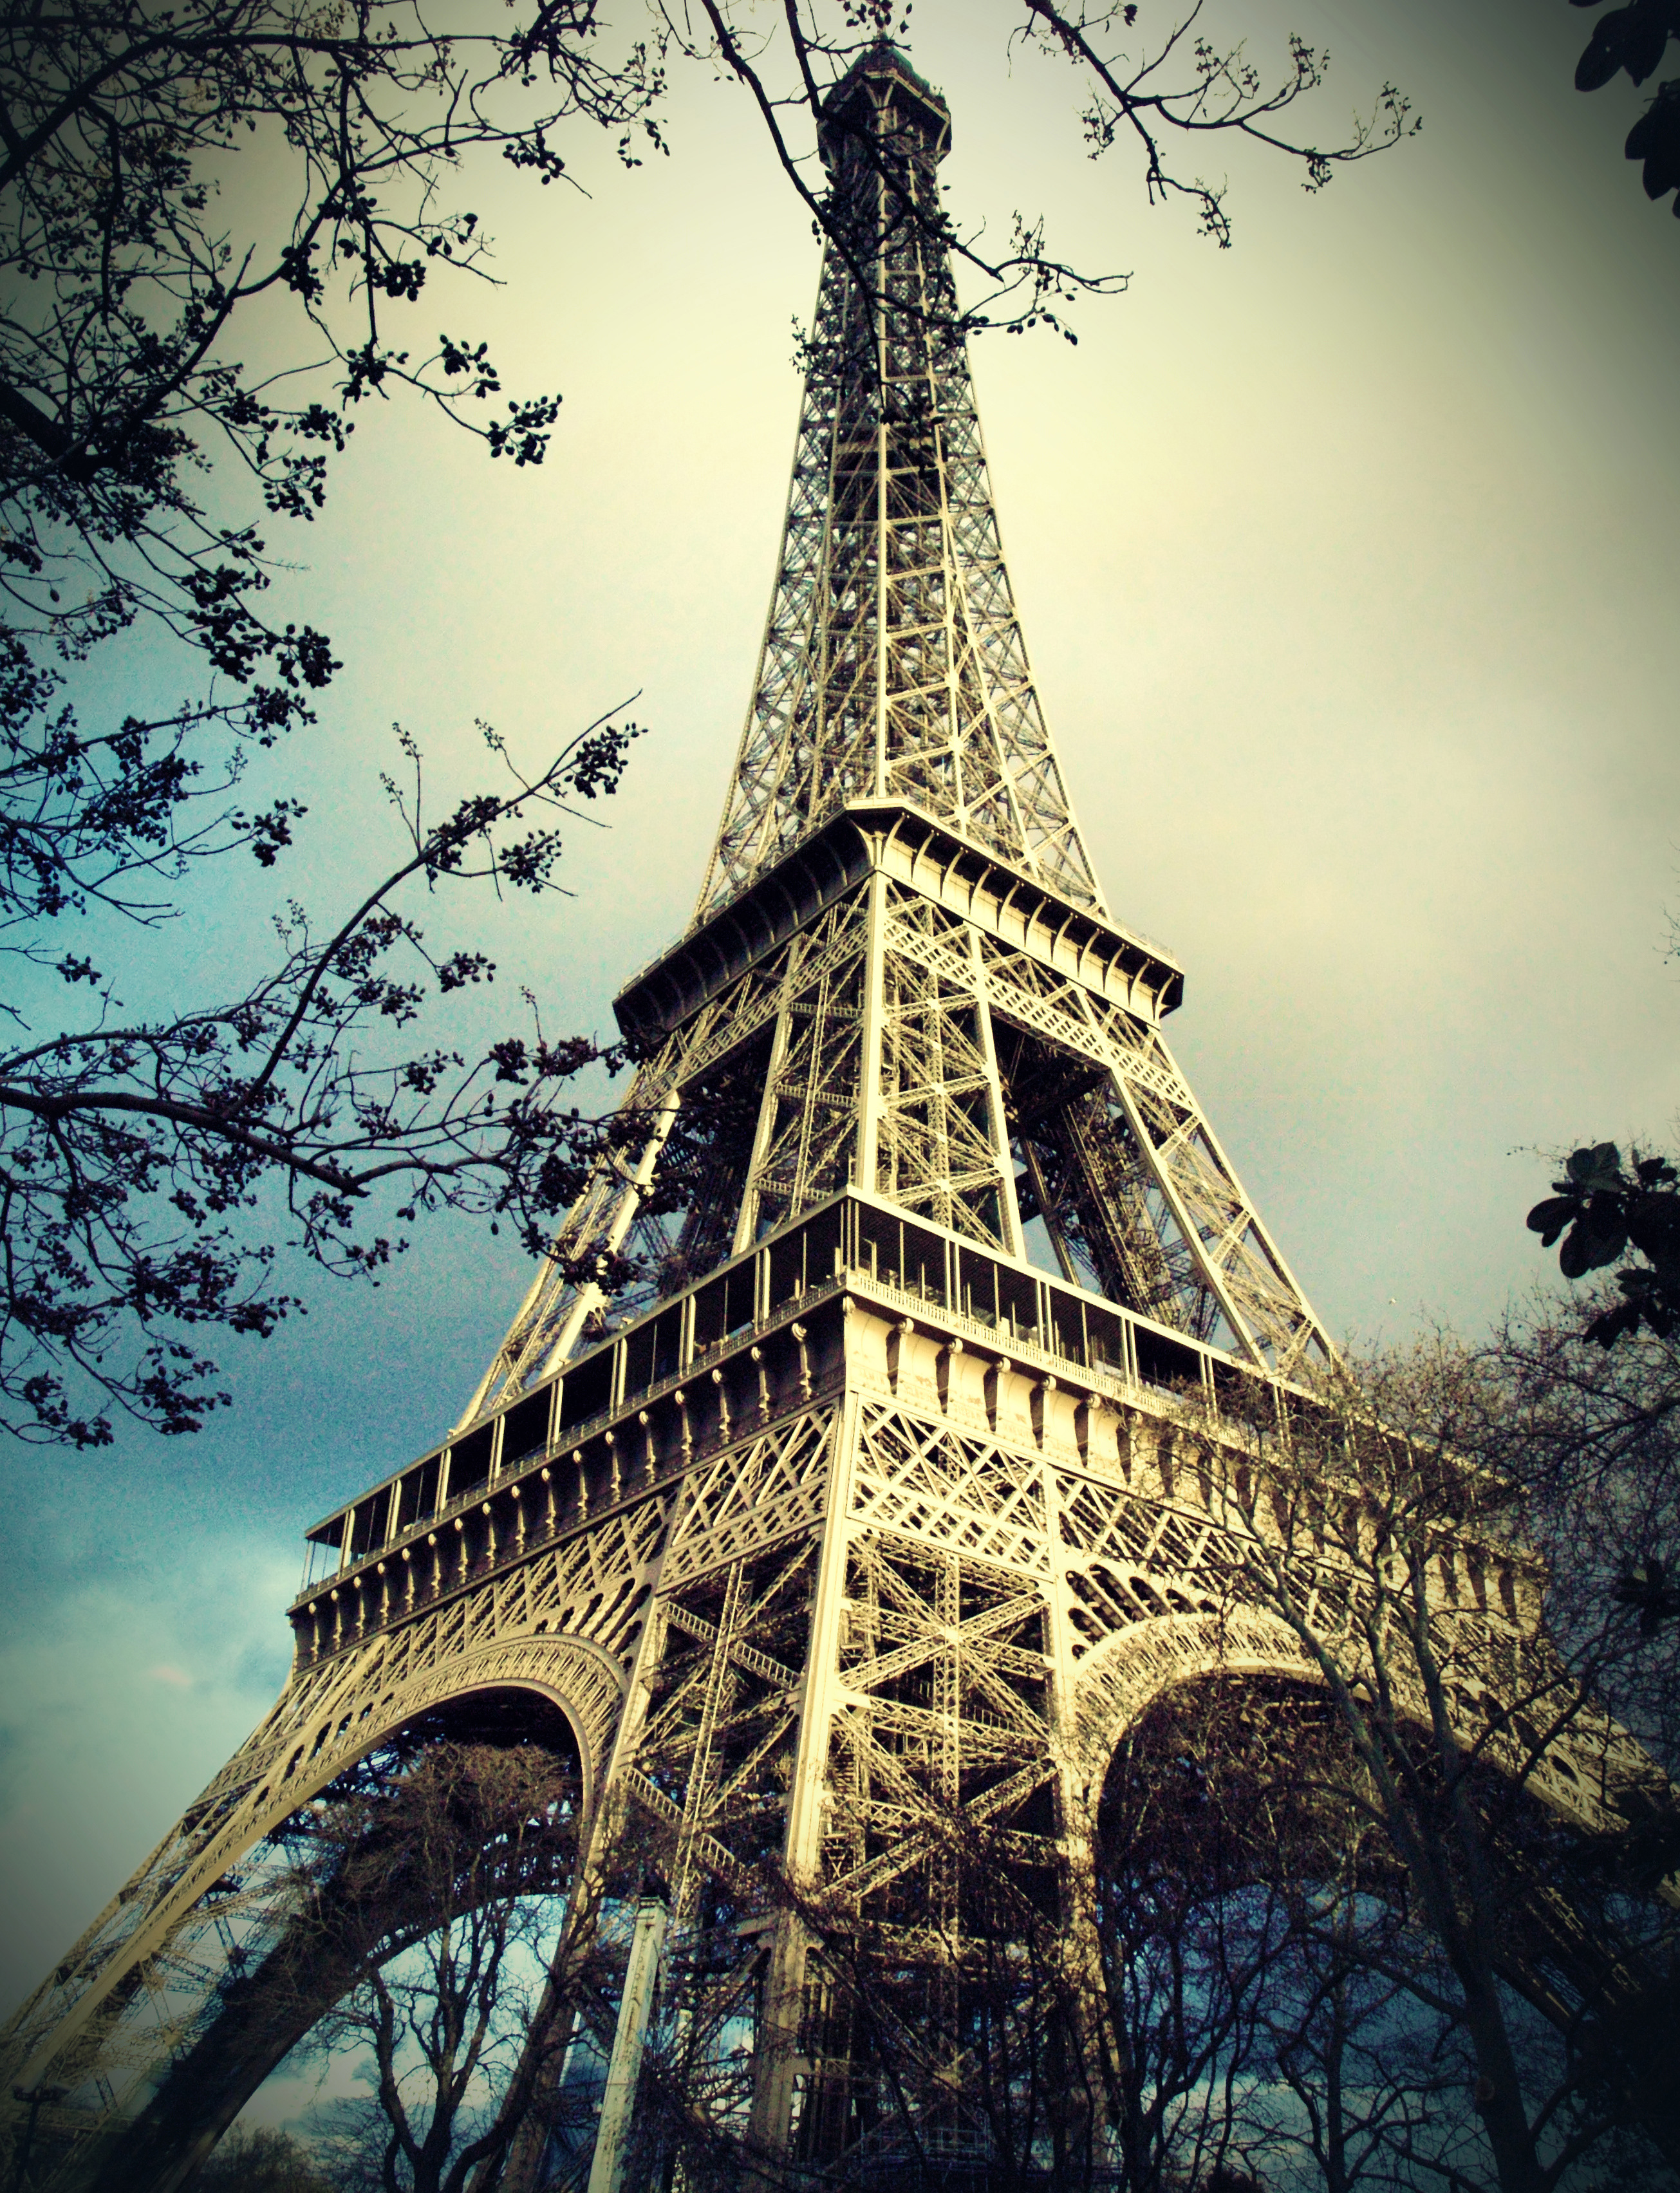 Photoshop Interface Project 2 “Eiffel Tower”